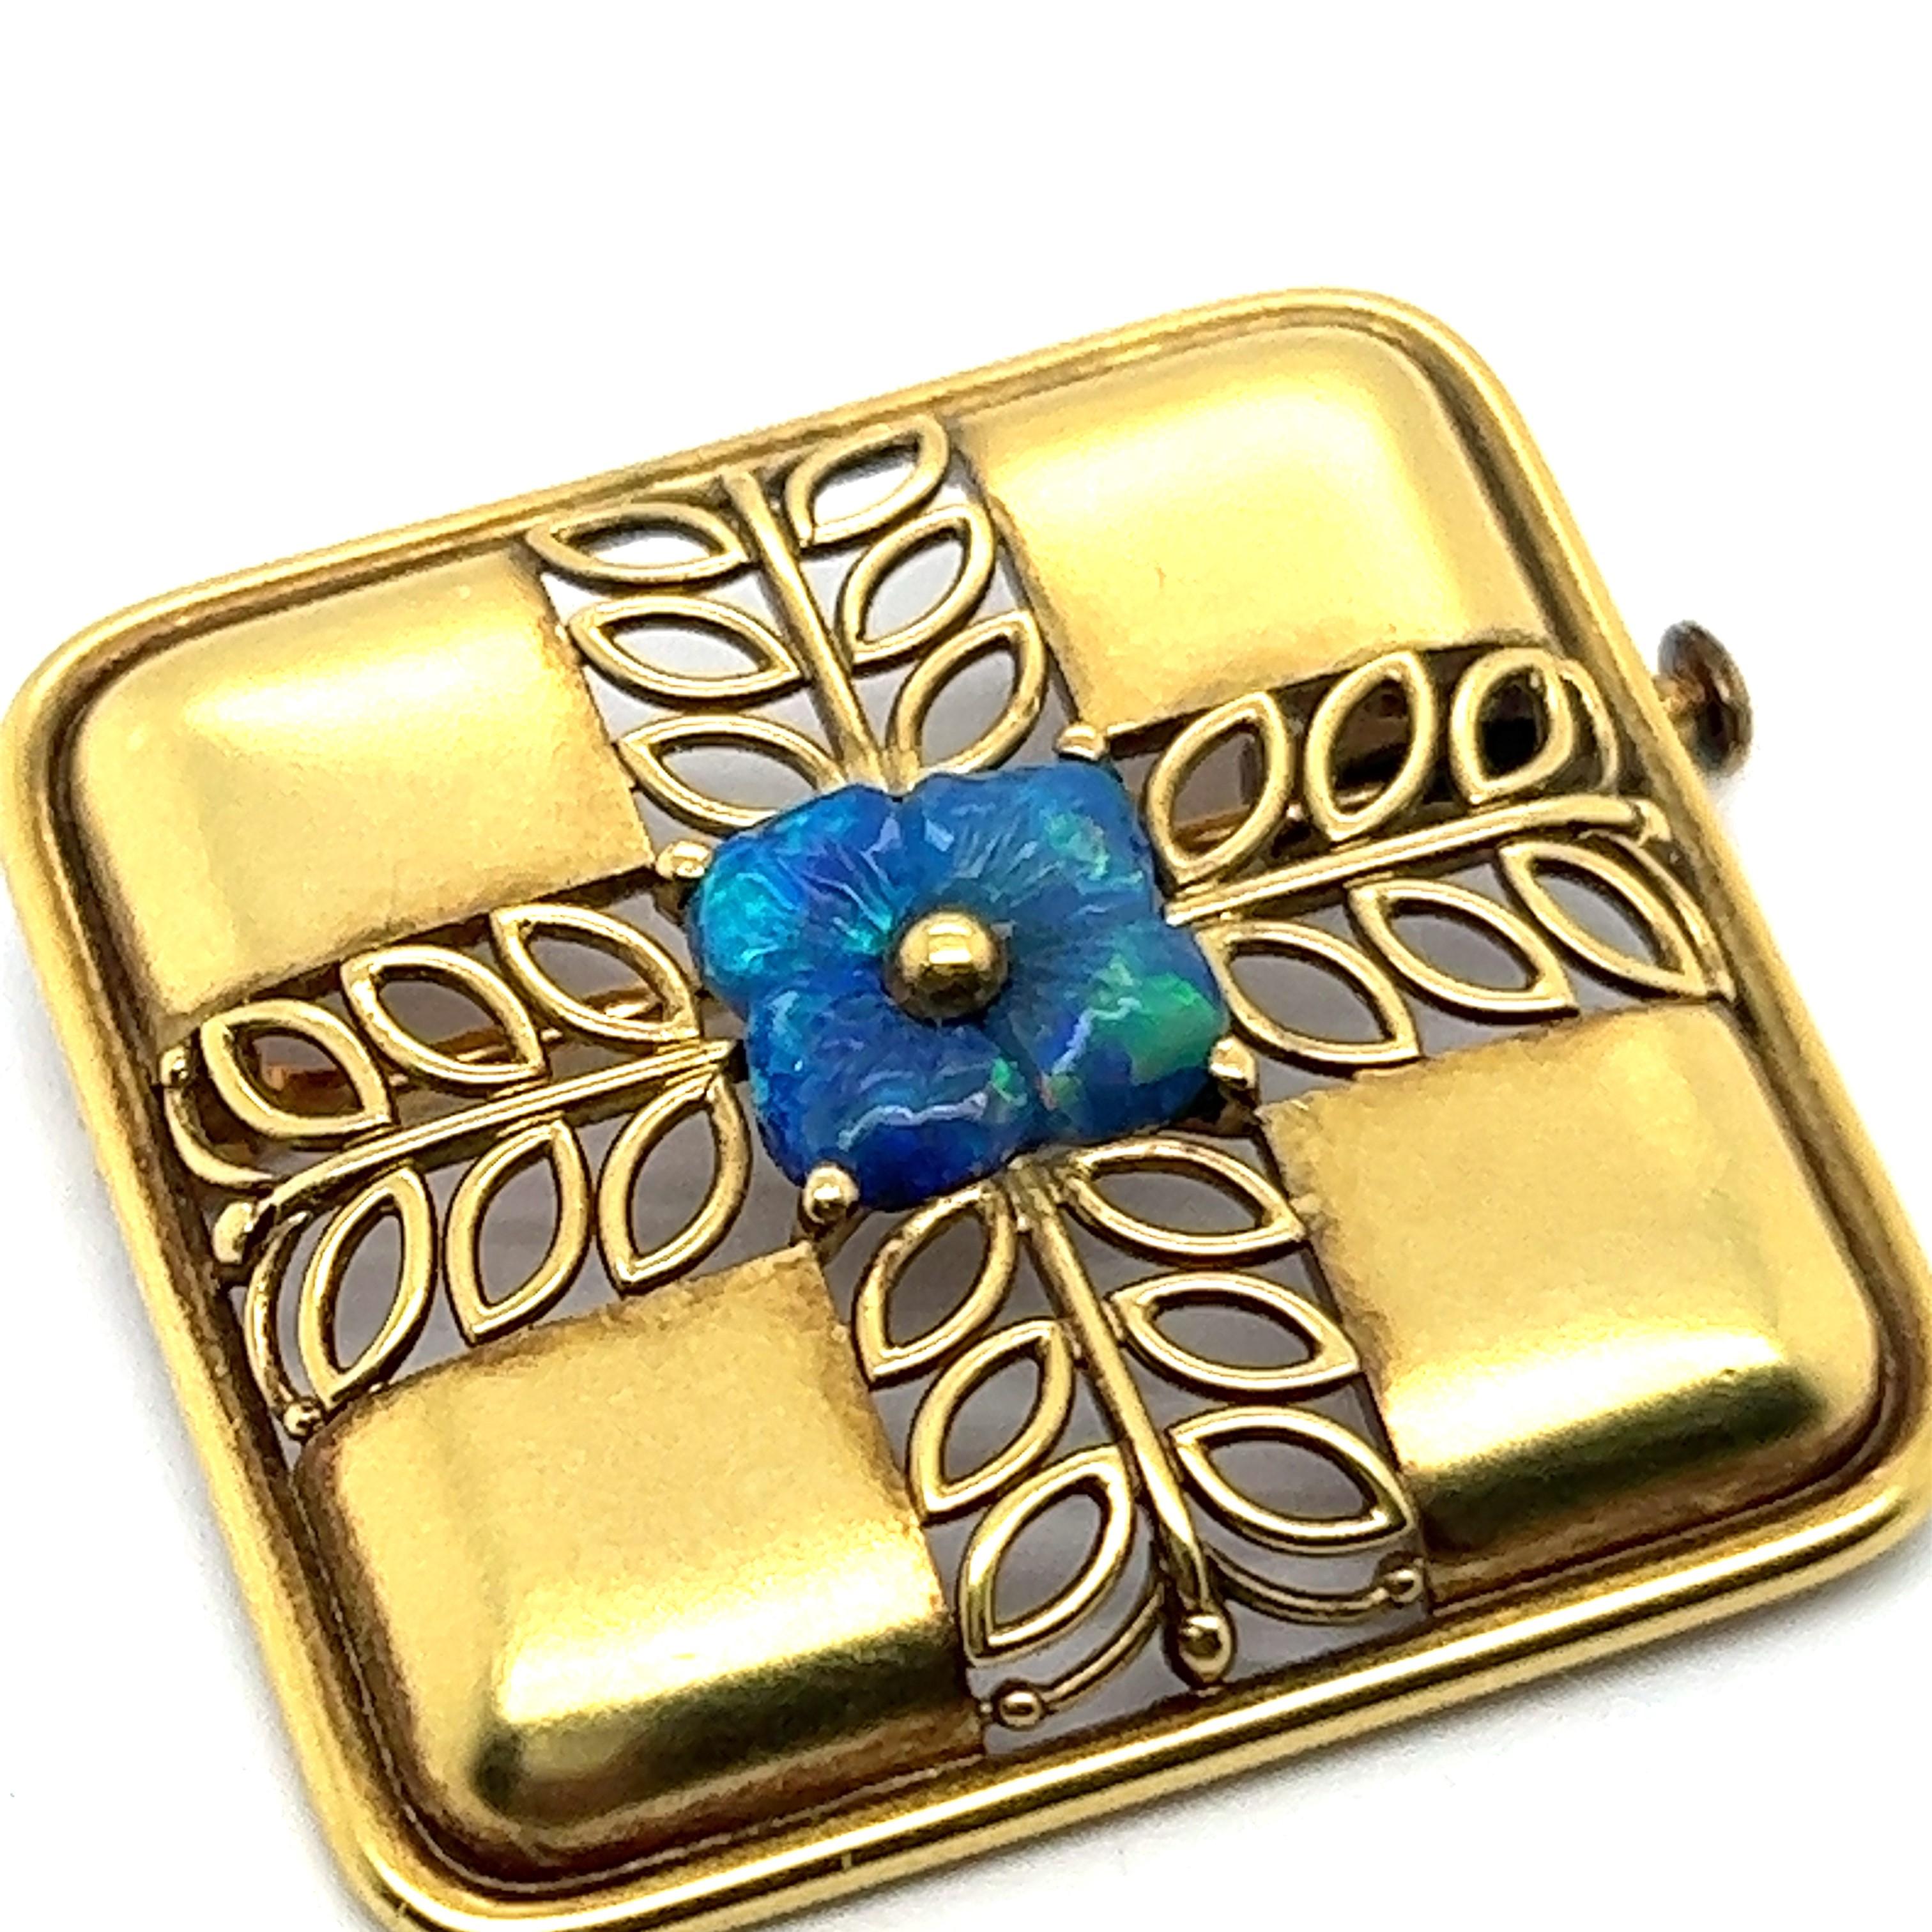 This exquisite vintage opal brooch in 18 Karat yellow gold enchants with elegance. 

At the center of the square design is a small blue opal flower radiating delicate charm. Around the flower is a finely woven pattern that in a cross form. The